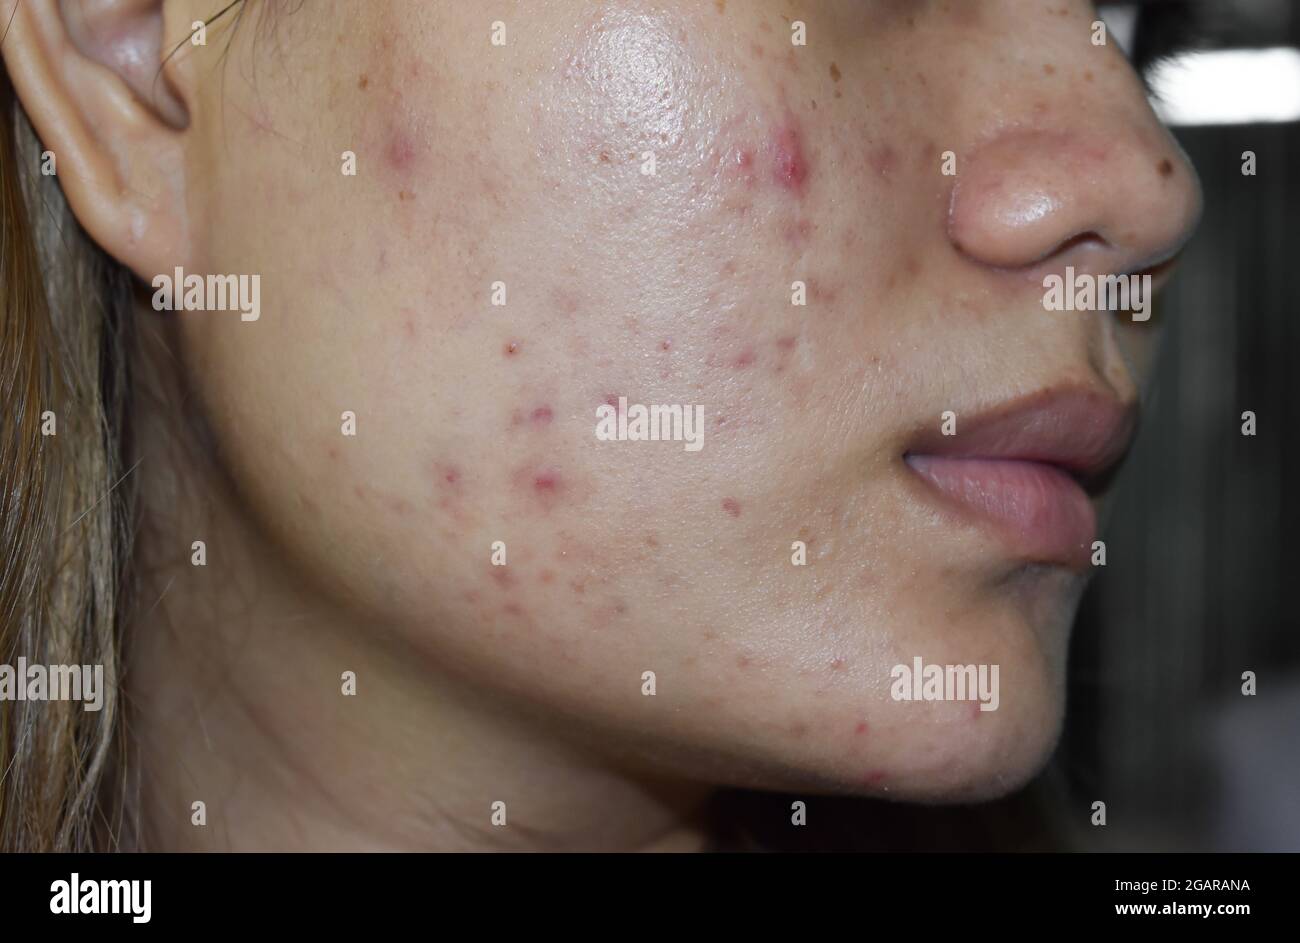 acne vulgaris and scars over whole face of Southeast Asian woman. Acne occurs when hair follicles become plugged with oil and dead cells. It causes wh Stock Photo